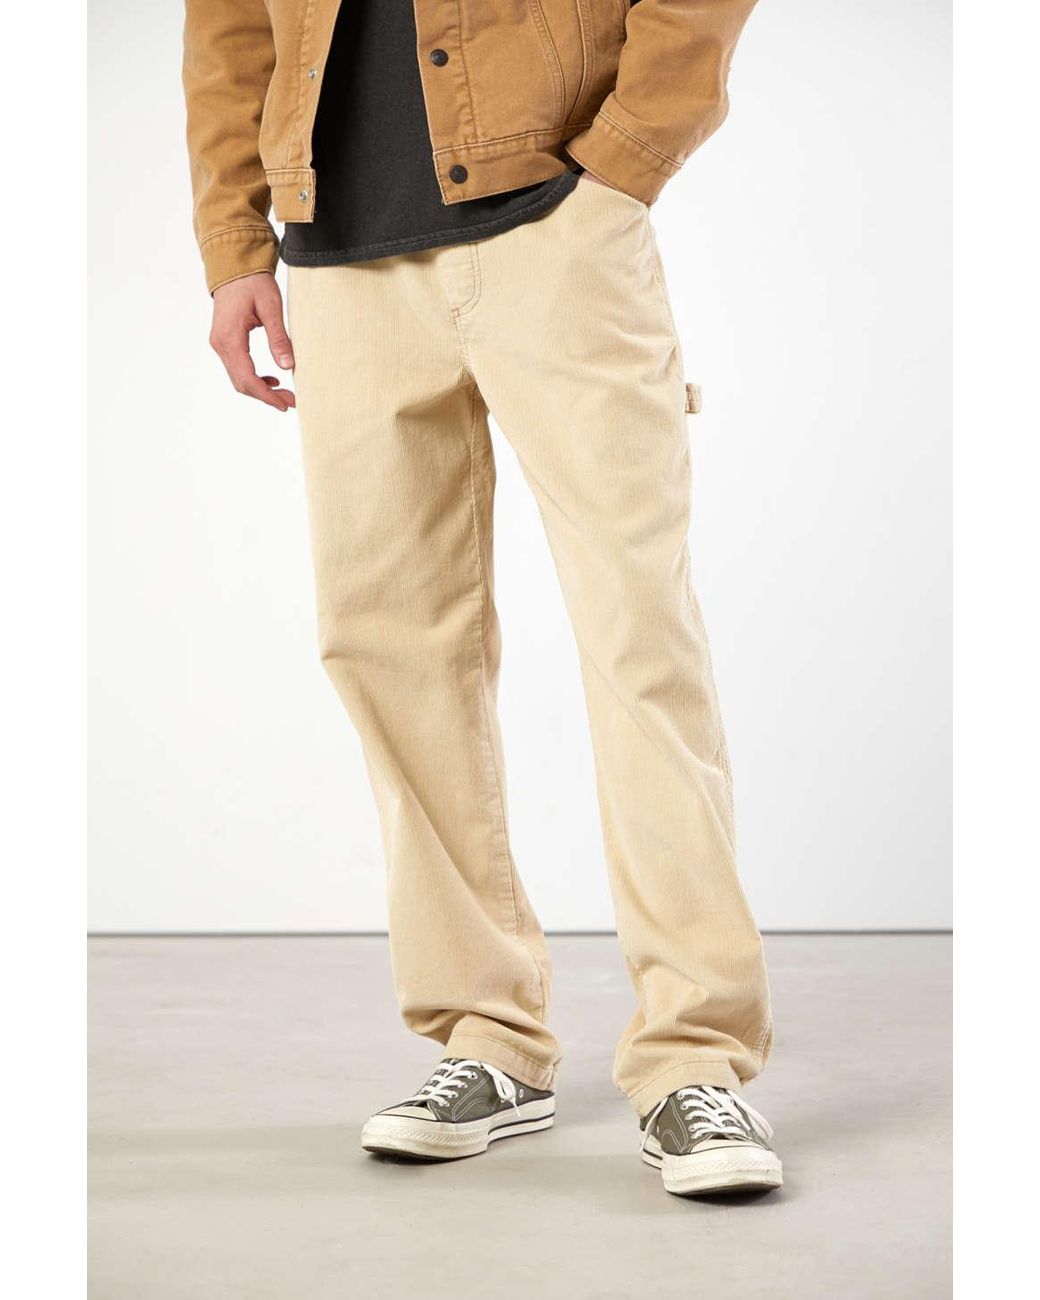 The Oldroyd Trouser in Brown corduroy  Oldfield Outfitters